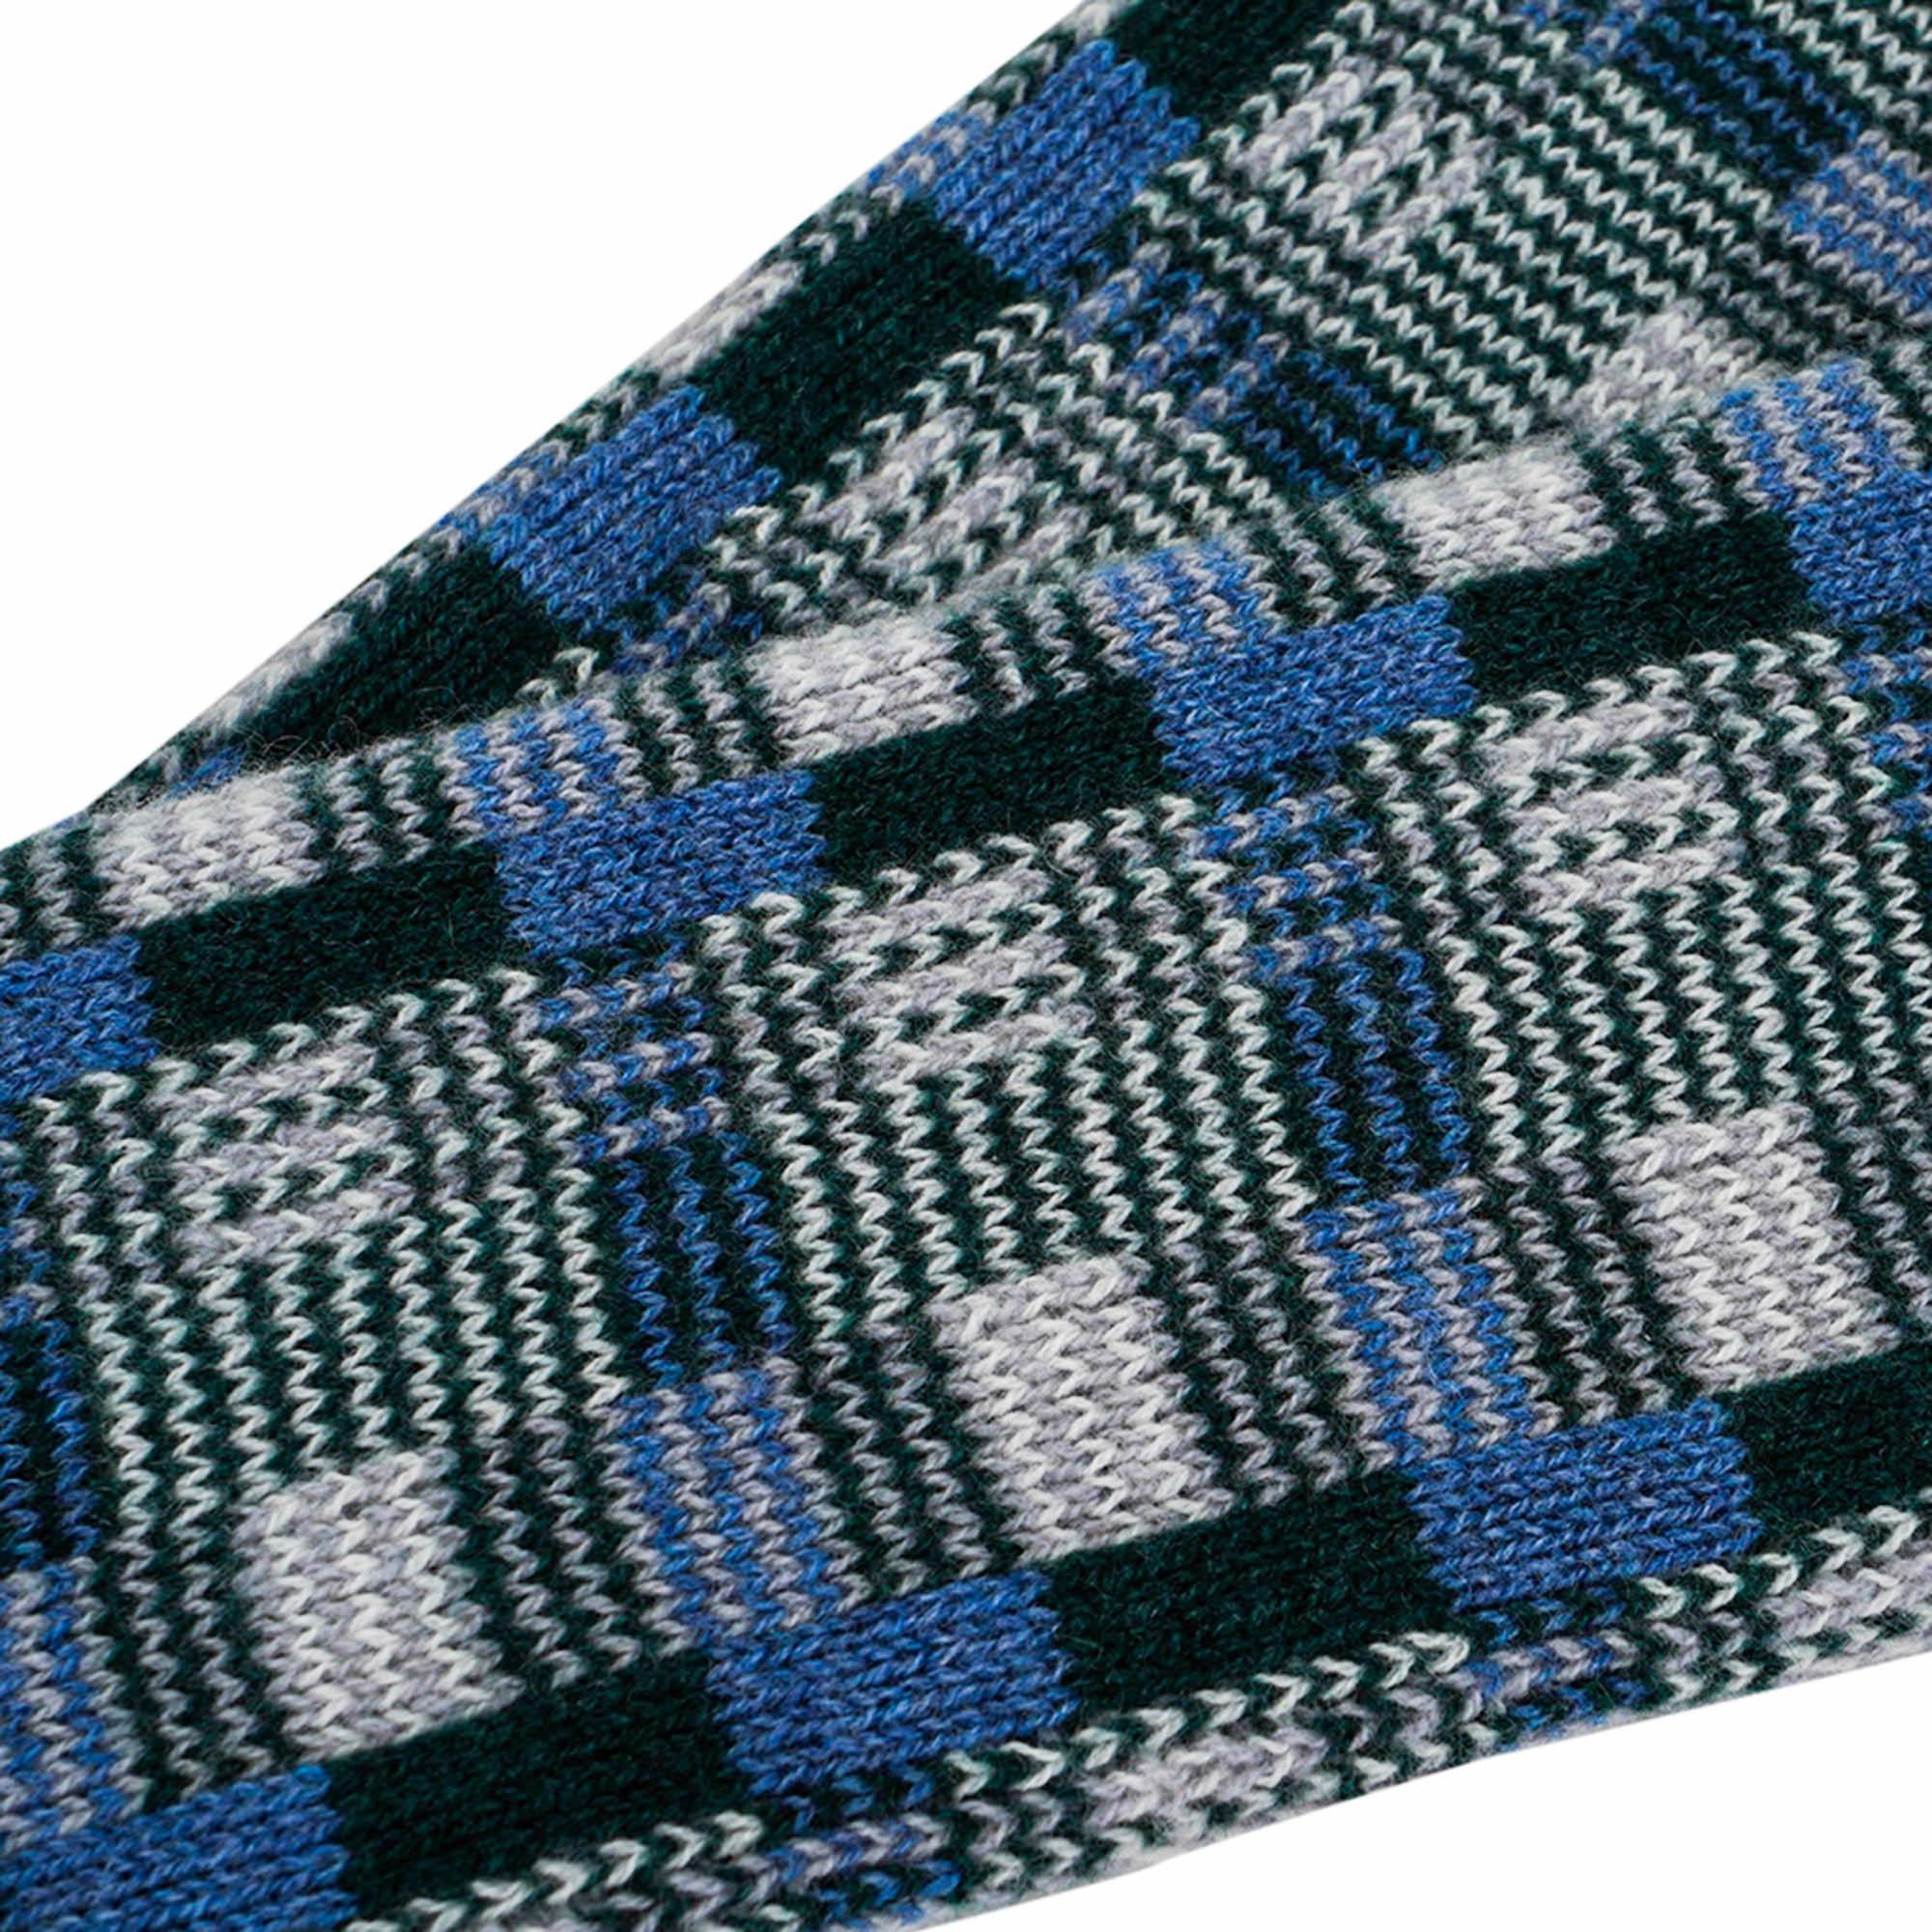 Mightychic offers a pair of limited edition Hermes Sherwood plaid cashmere socks featured in Bleu Denim.
Designed by Katie Scott.
Each sock has a small Palladium plated rivet engraved Hermes Paris.
Wonderful to wear or gift!
Fabric is 78% cashmere